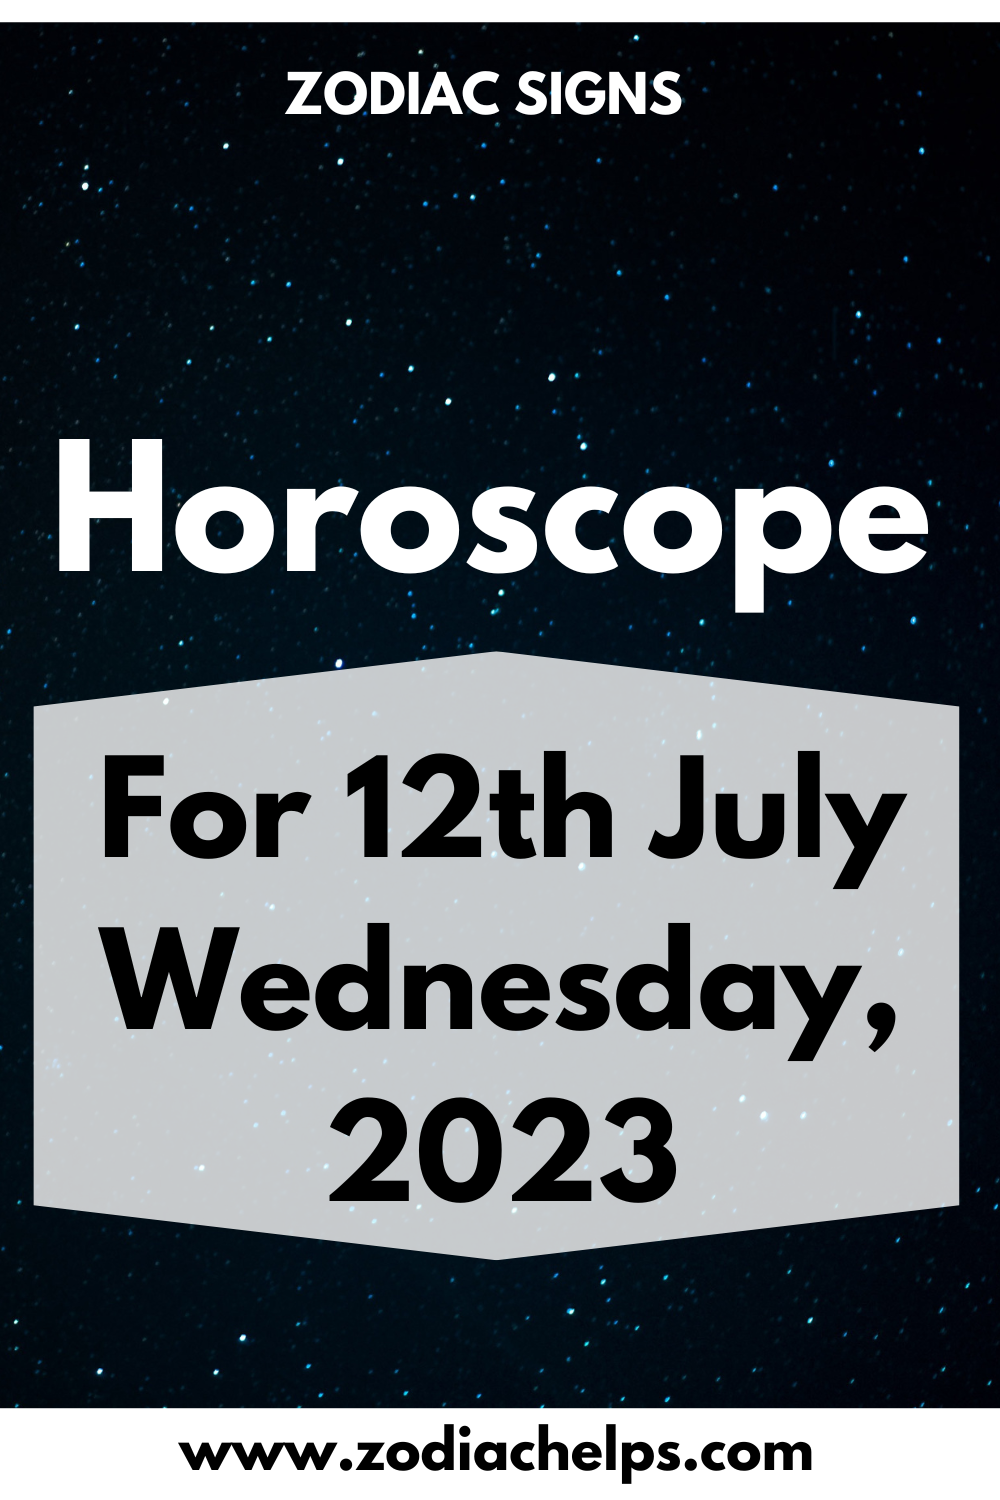 Horoscope for 12th July Wednesday, 2023